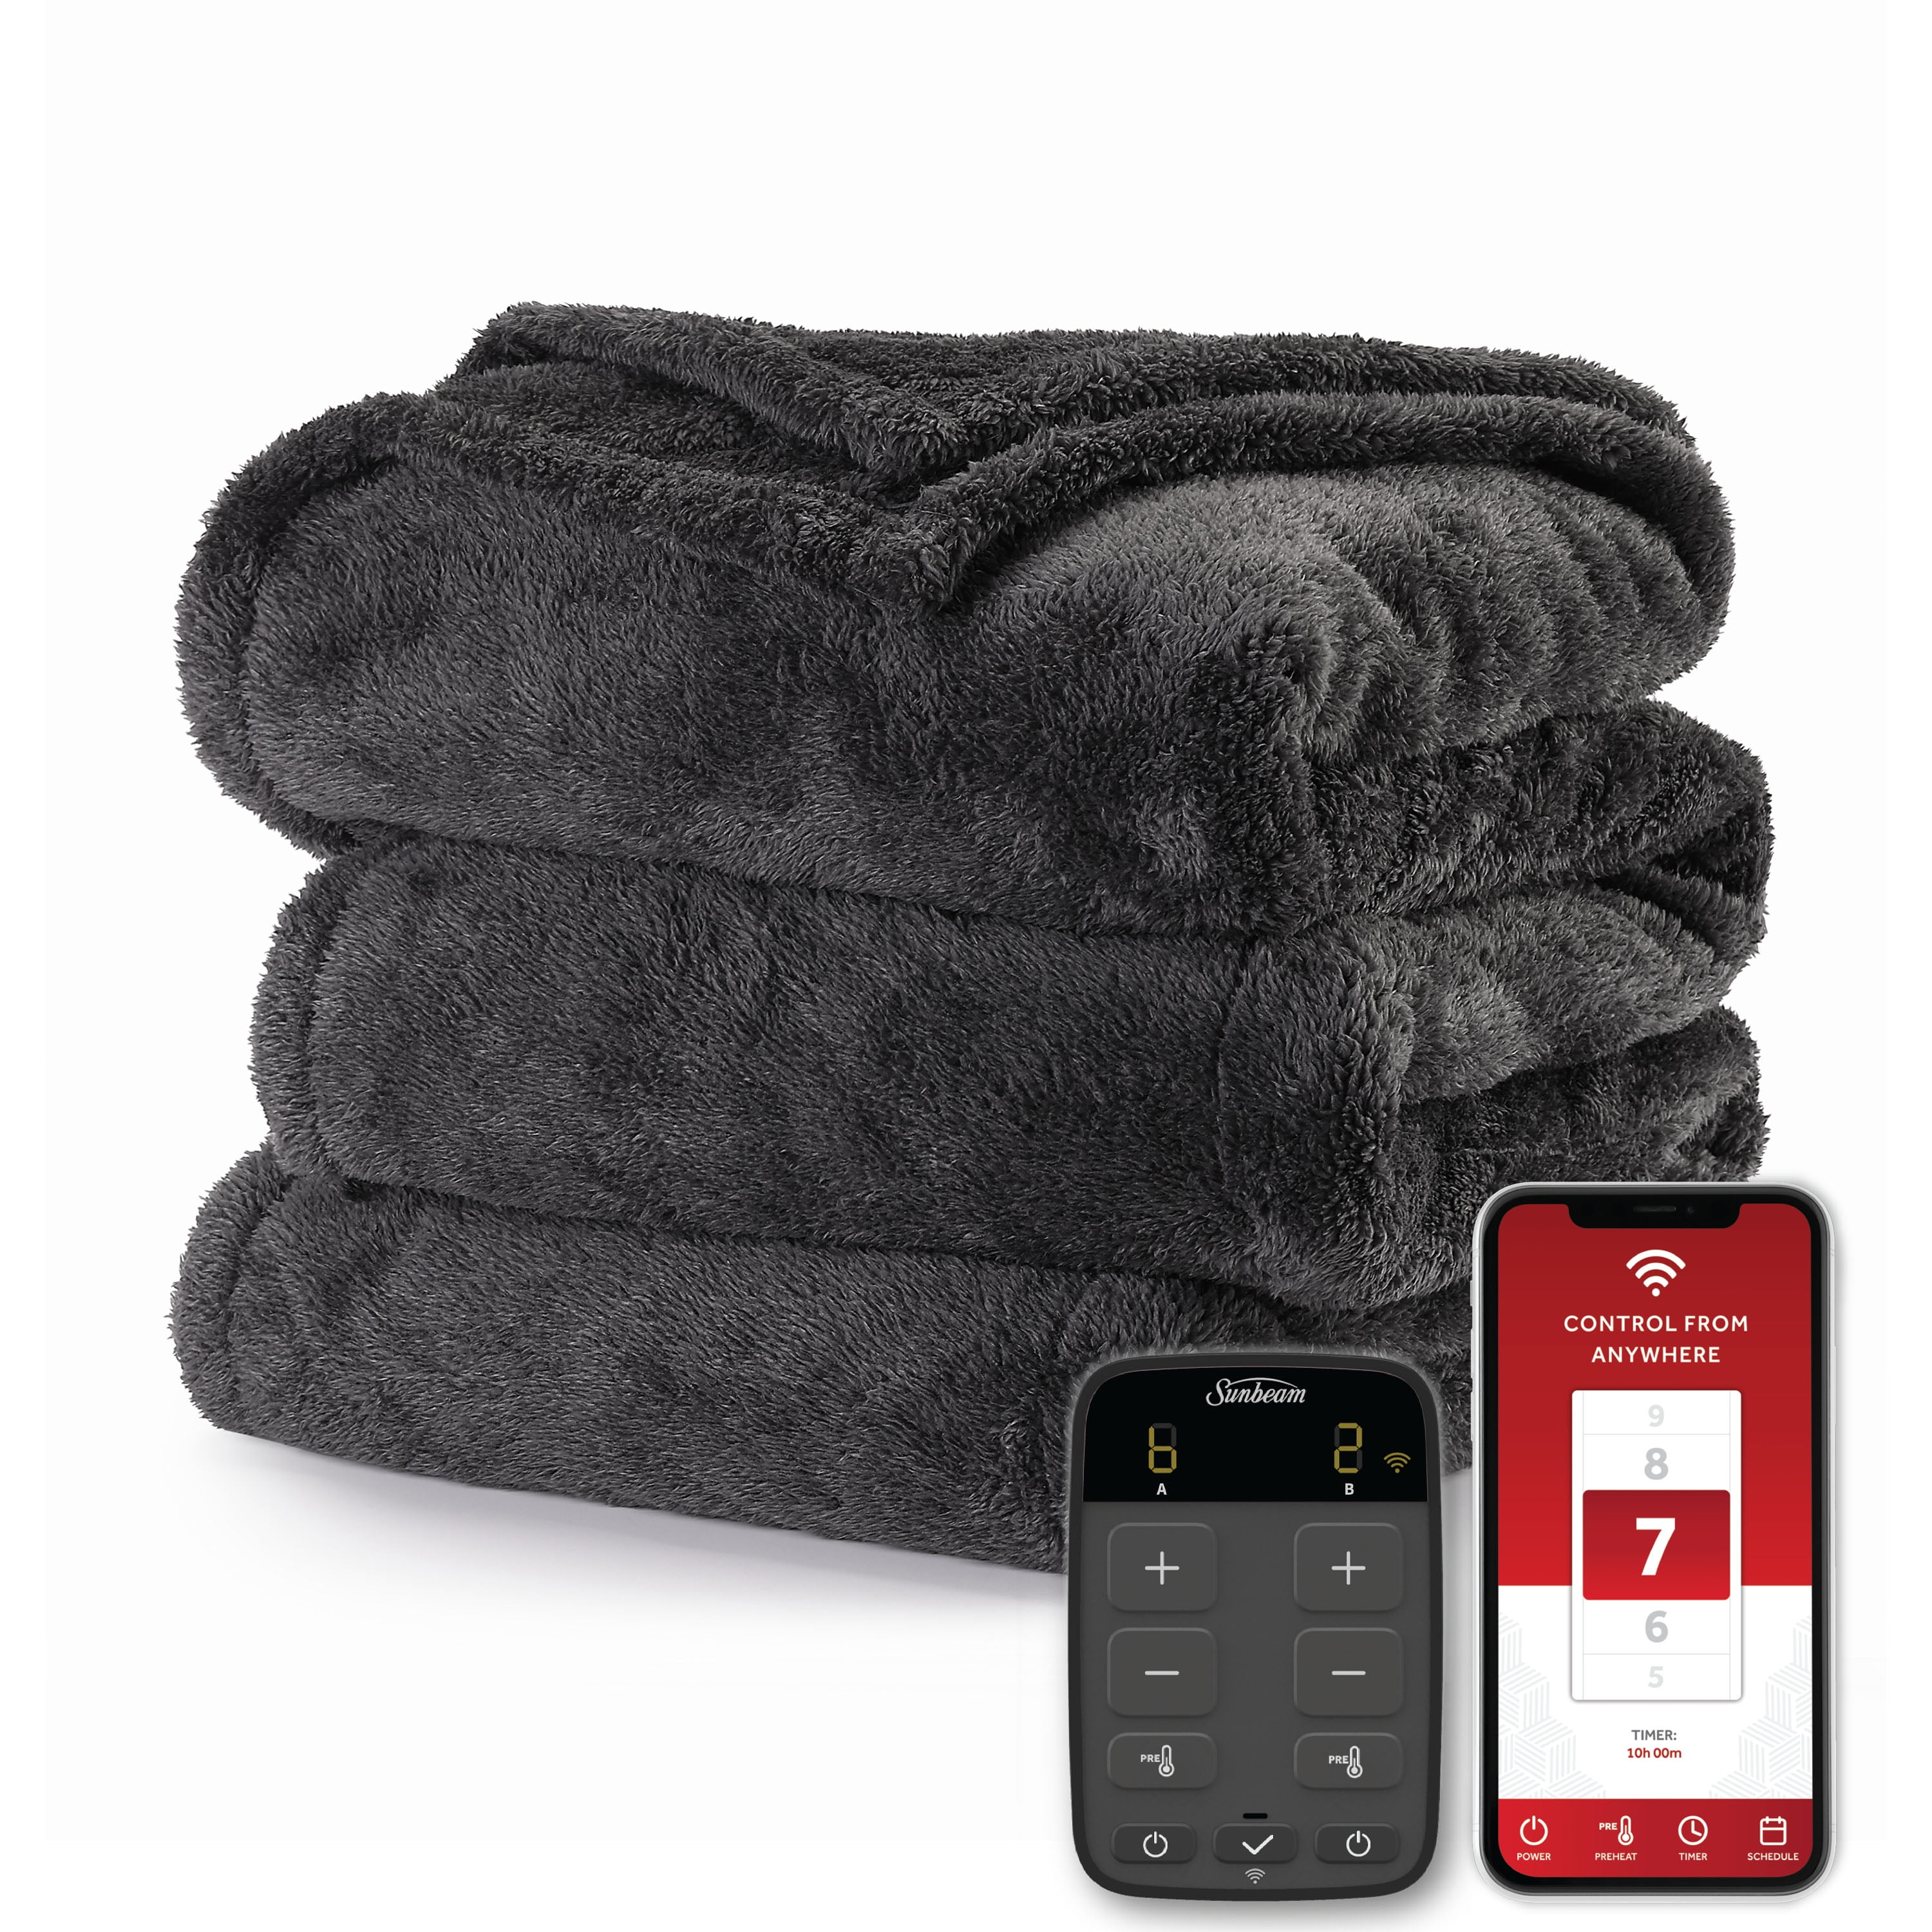 Sunbeam Connected WiFi Heated Blanket: Twin $16.60, Full $24.80, Queen $25.85 + Free S&H w/ Walmart+ or $35+